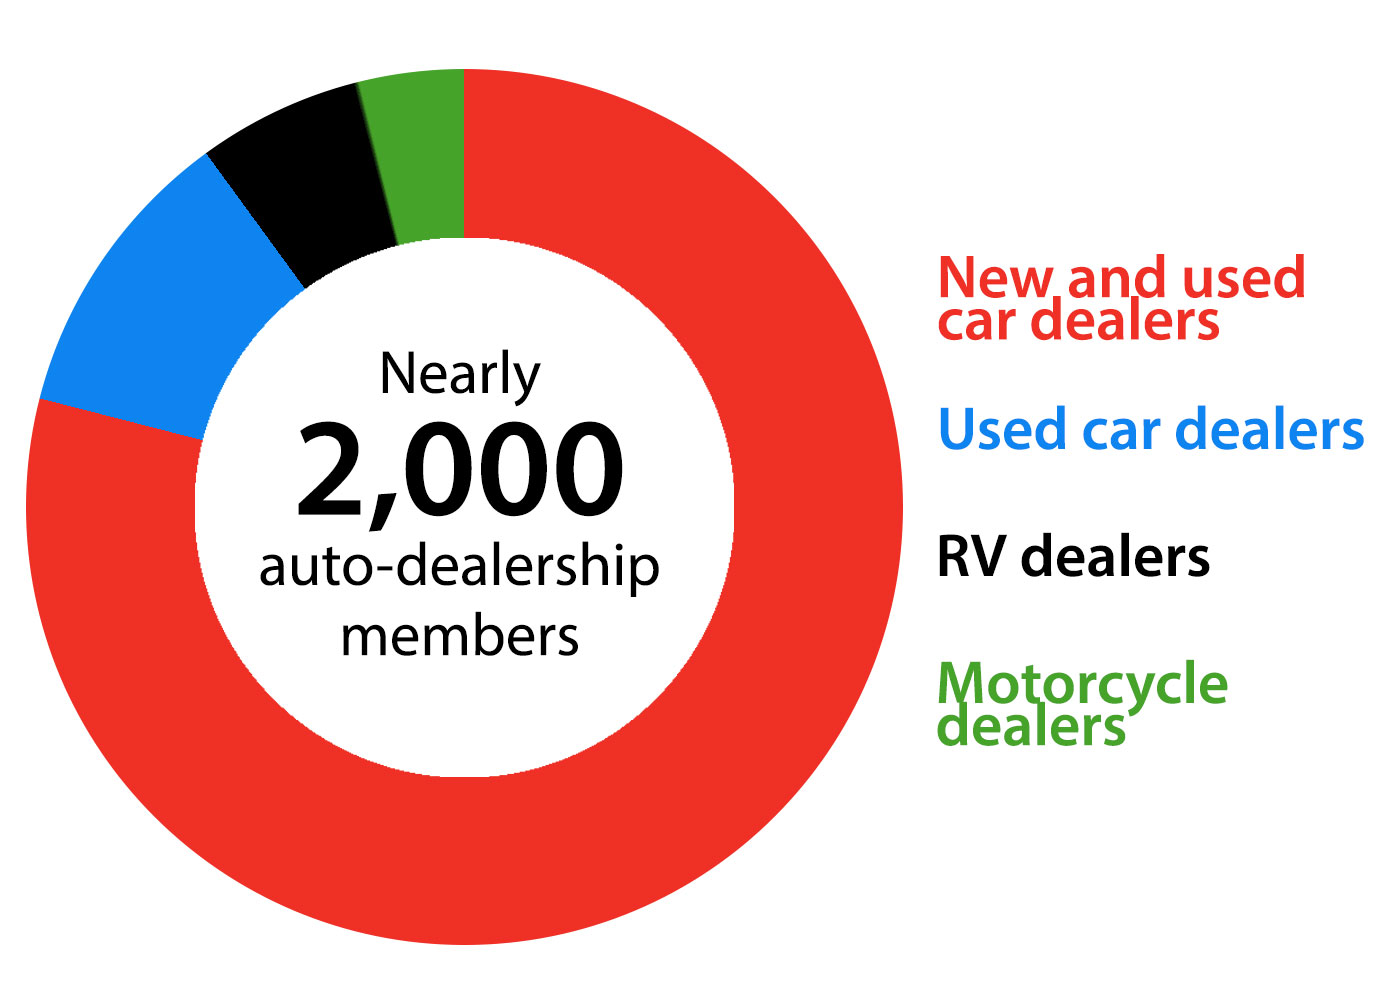 Over 2,000 auto-dealership members